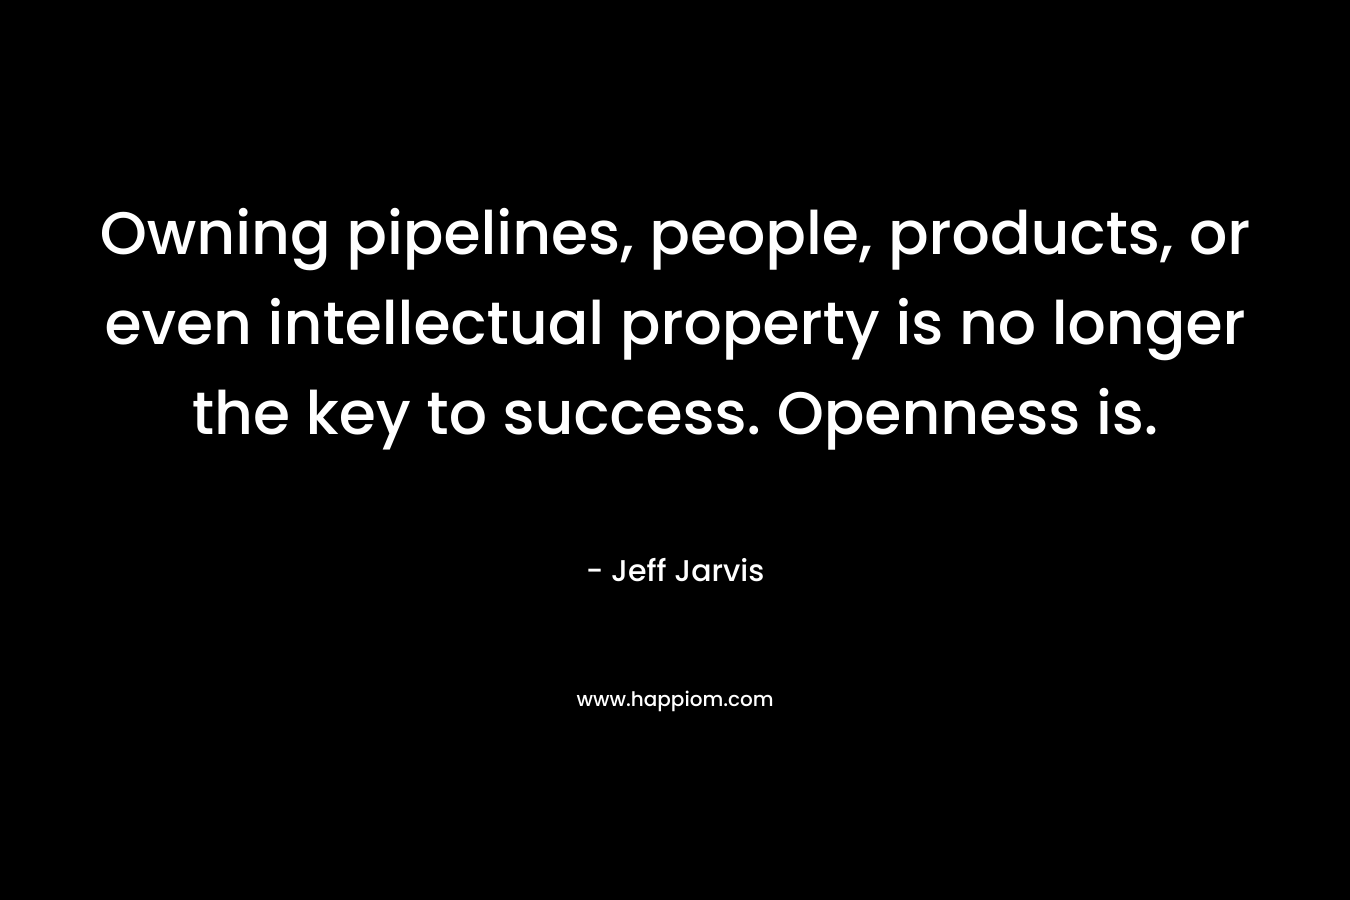 Owning pipelines, people, products, or even intellectual property is no longer the key to success. Openness is. – Jeff Jarvis